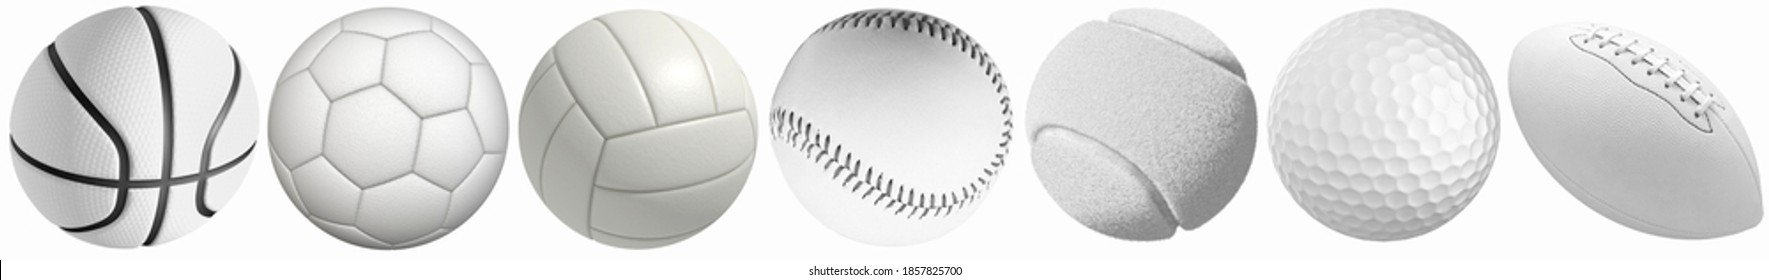 Different sports balls in a row: golf, basketball, volleyball, football, tennis, rugby, baseball isolated on a white background.